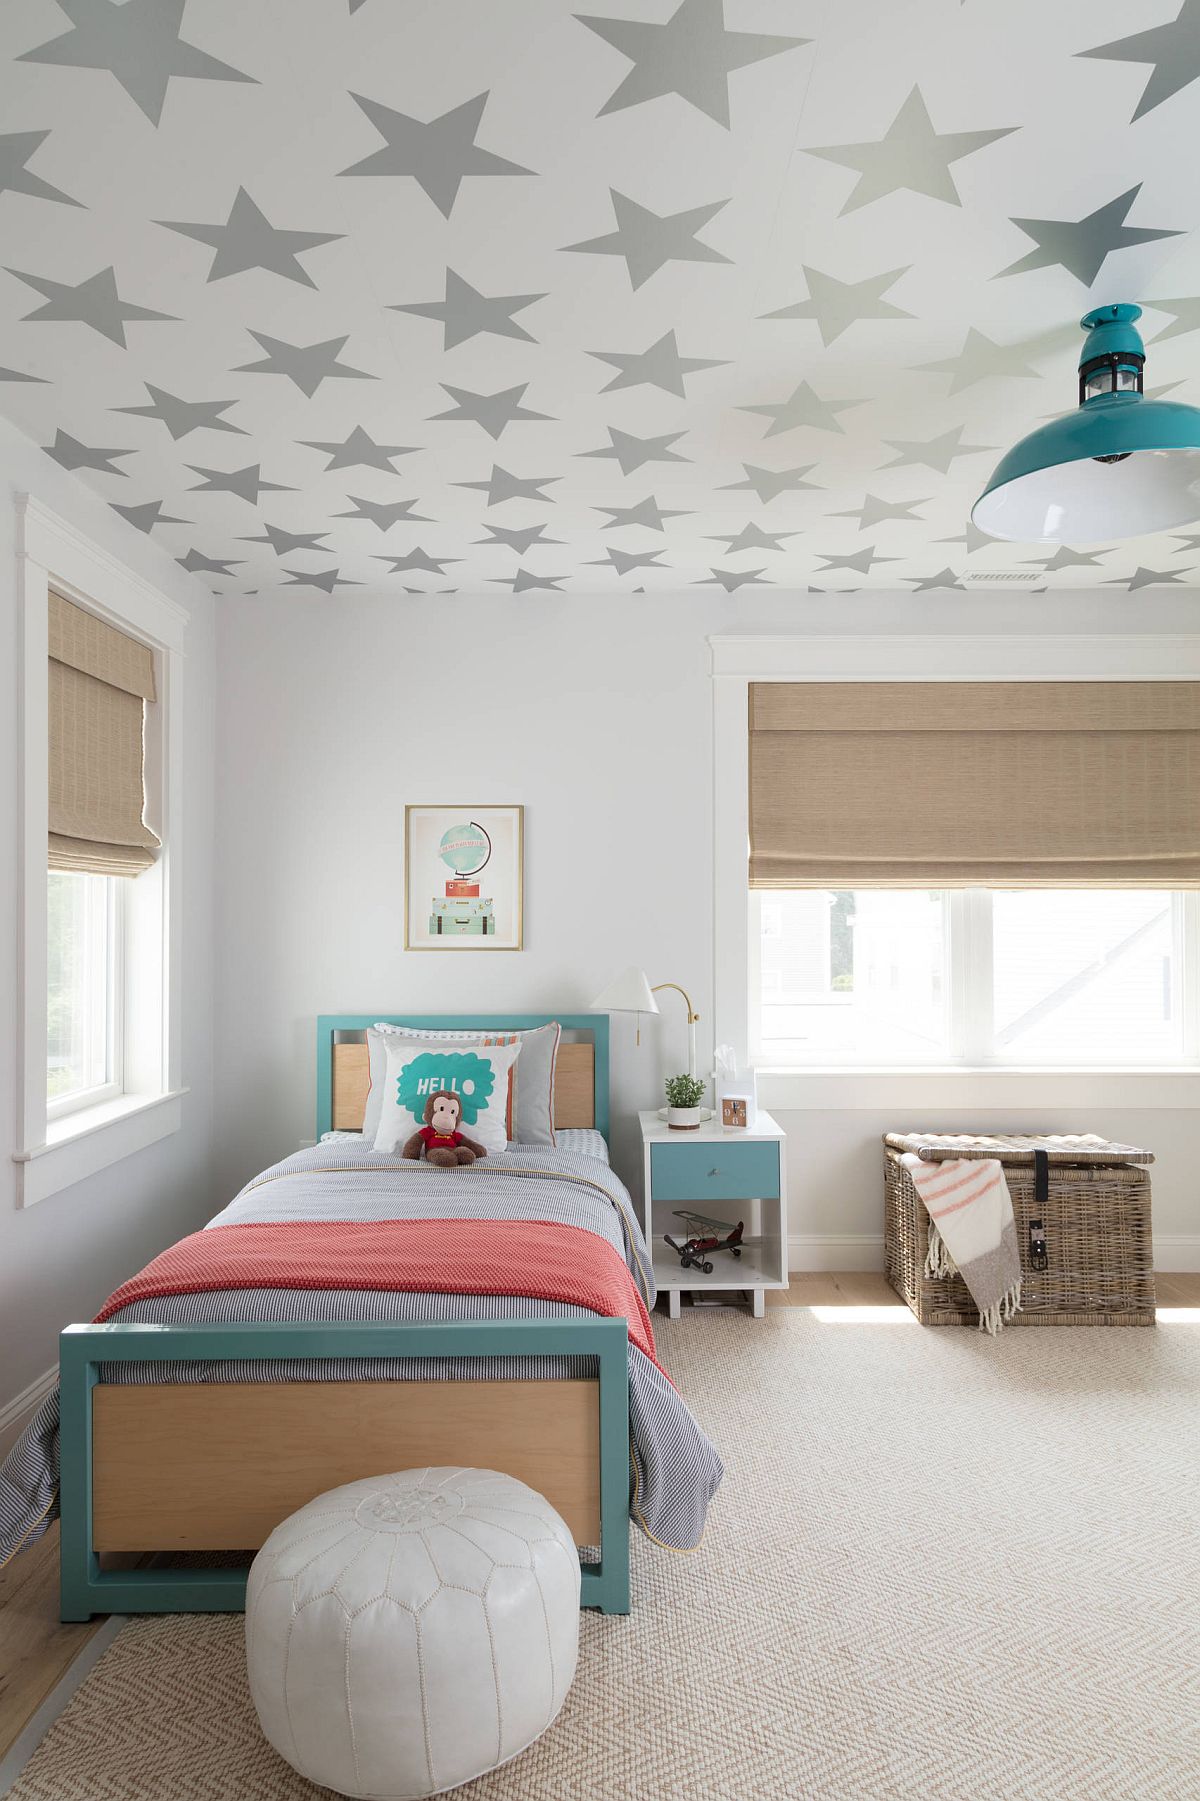 Wallpaper-on-ceiling 10 Cute Ways to Use Removable Wallpaper for Your Kid’s Bedroom